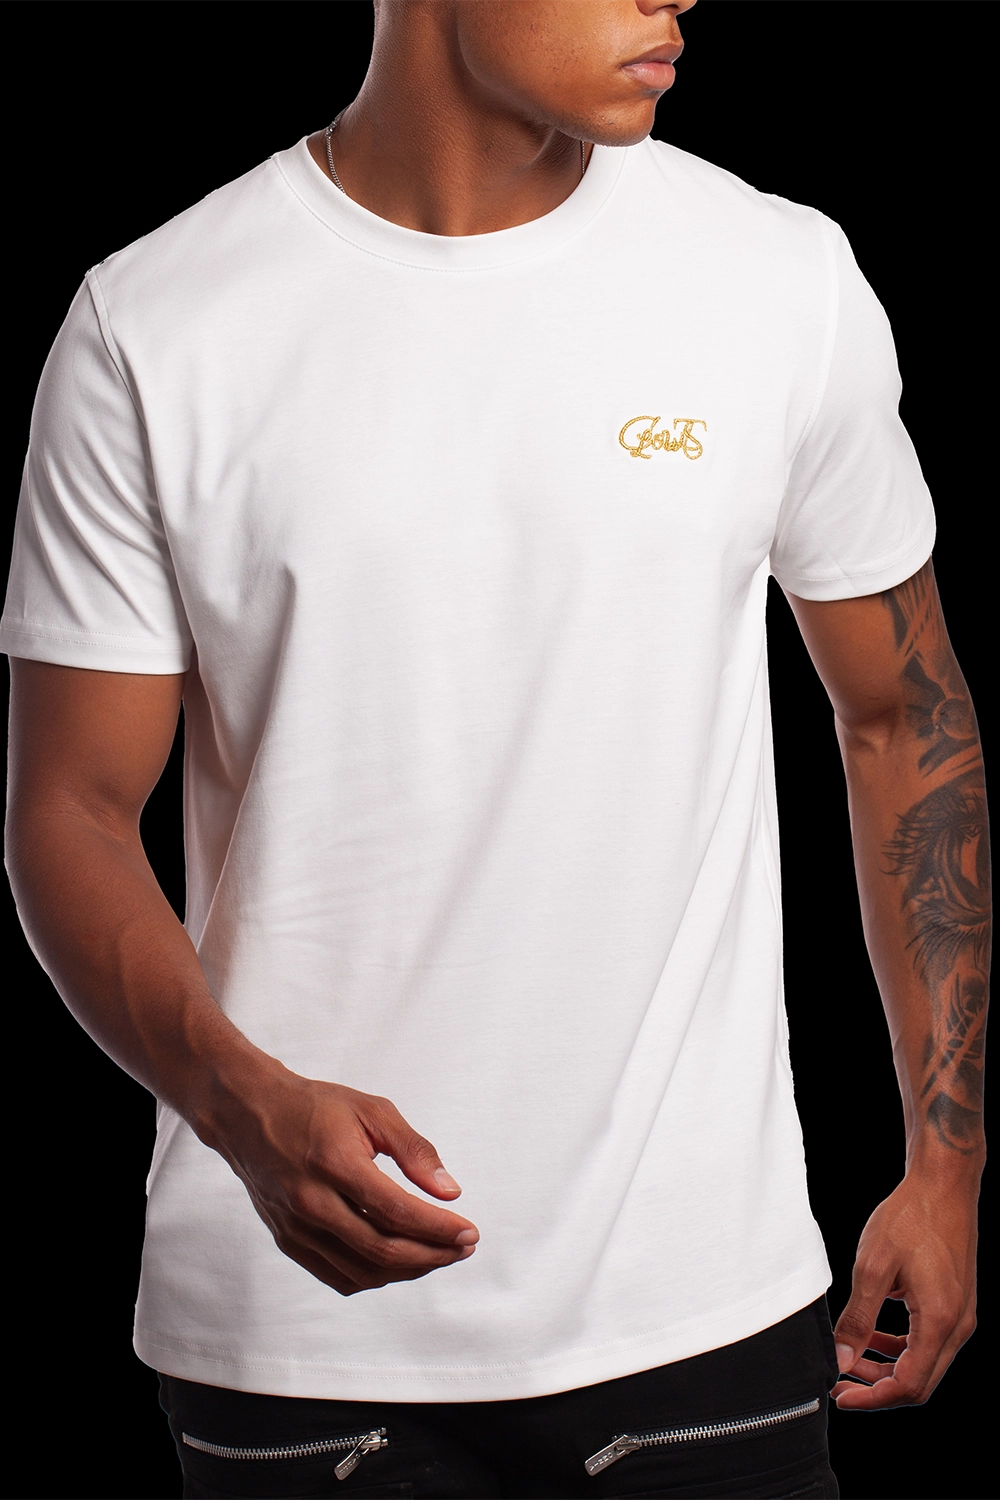 White T Shirt embroidered with the worlds finest Piana Clerico 24-carat gold thread- made exclusively in Italy designed in Ireland